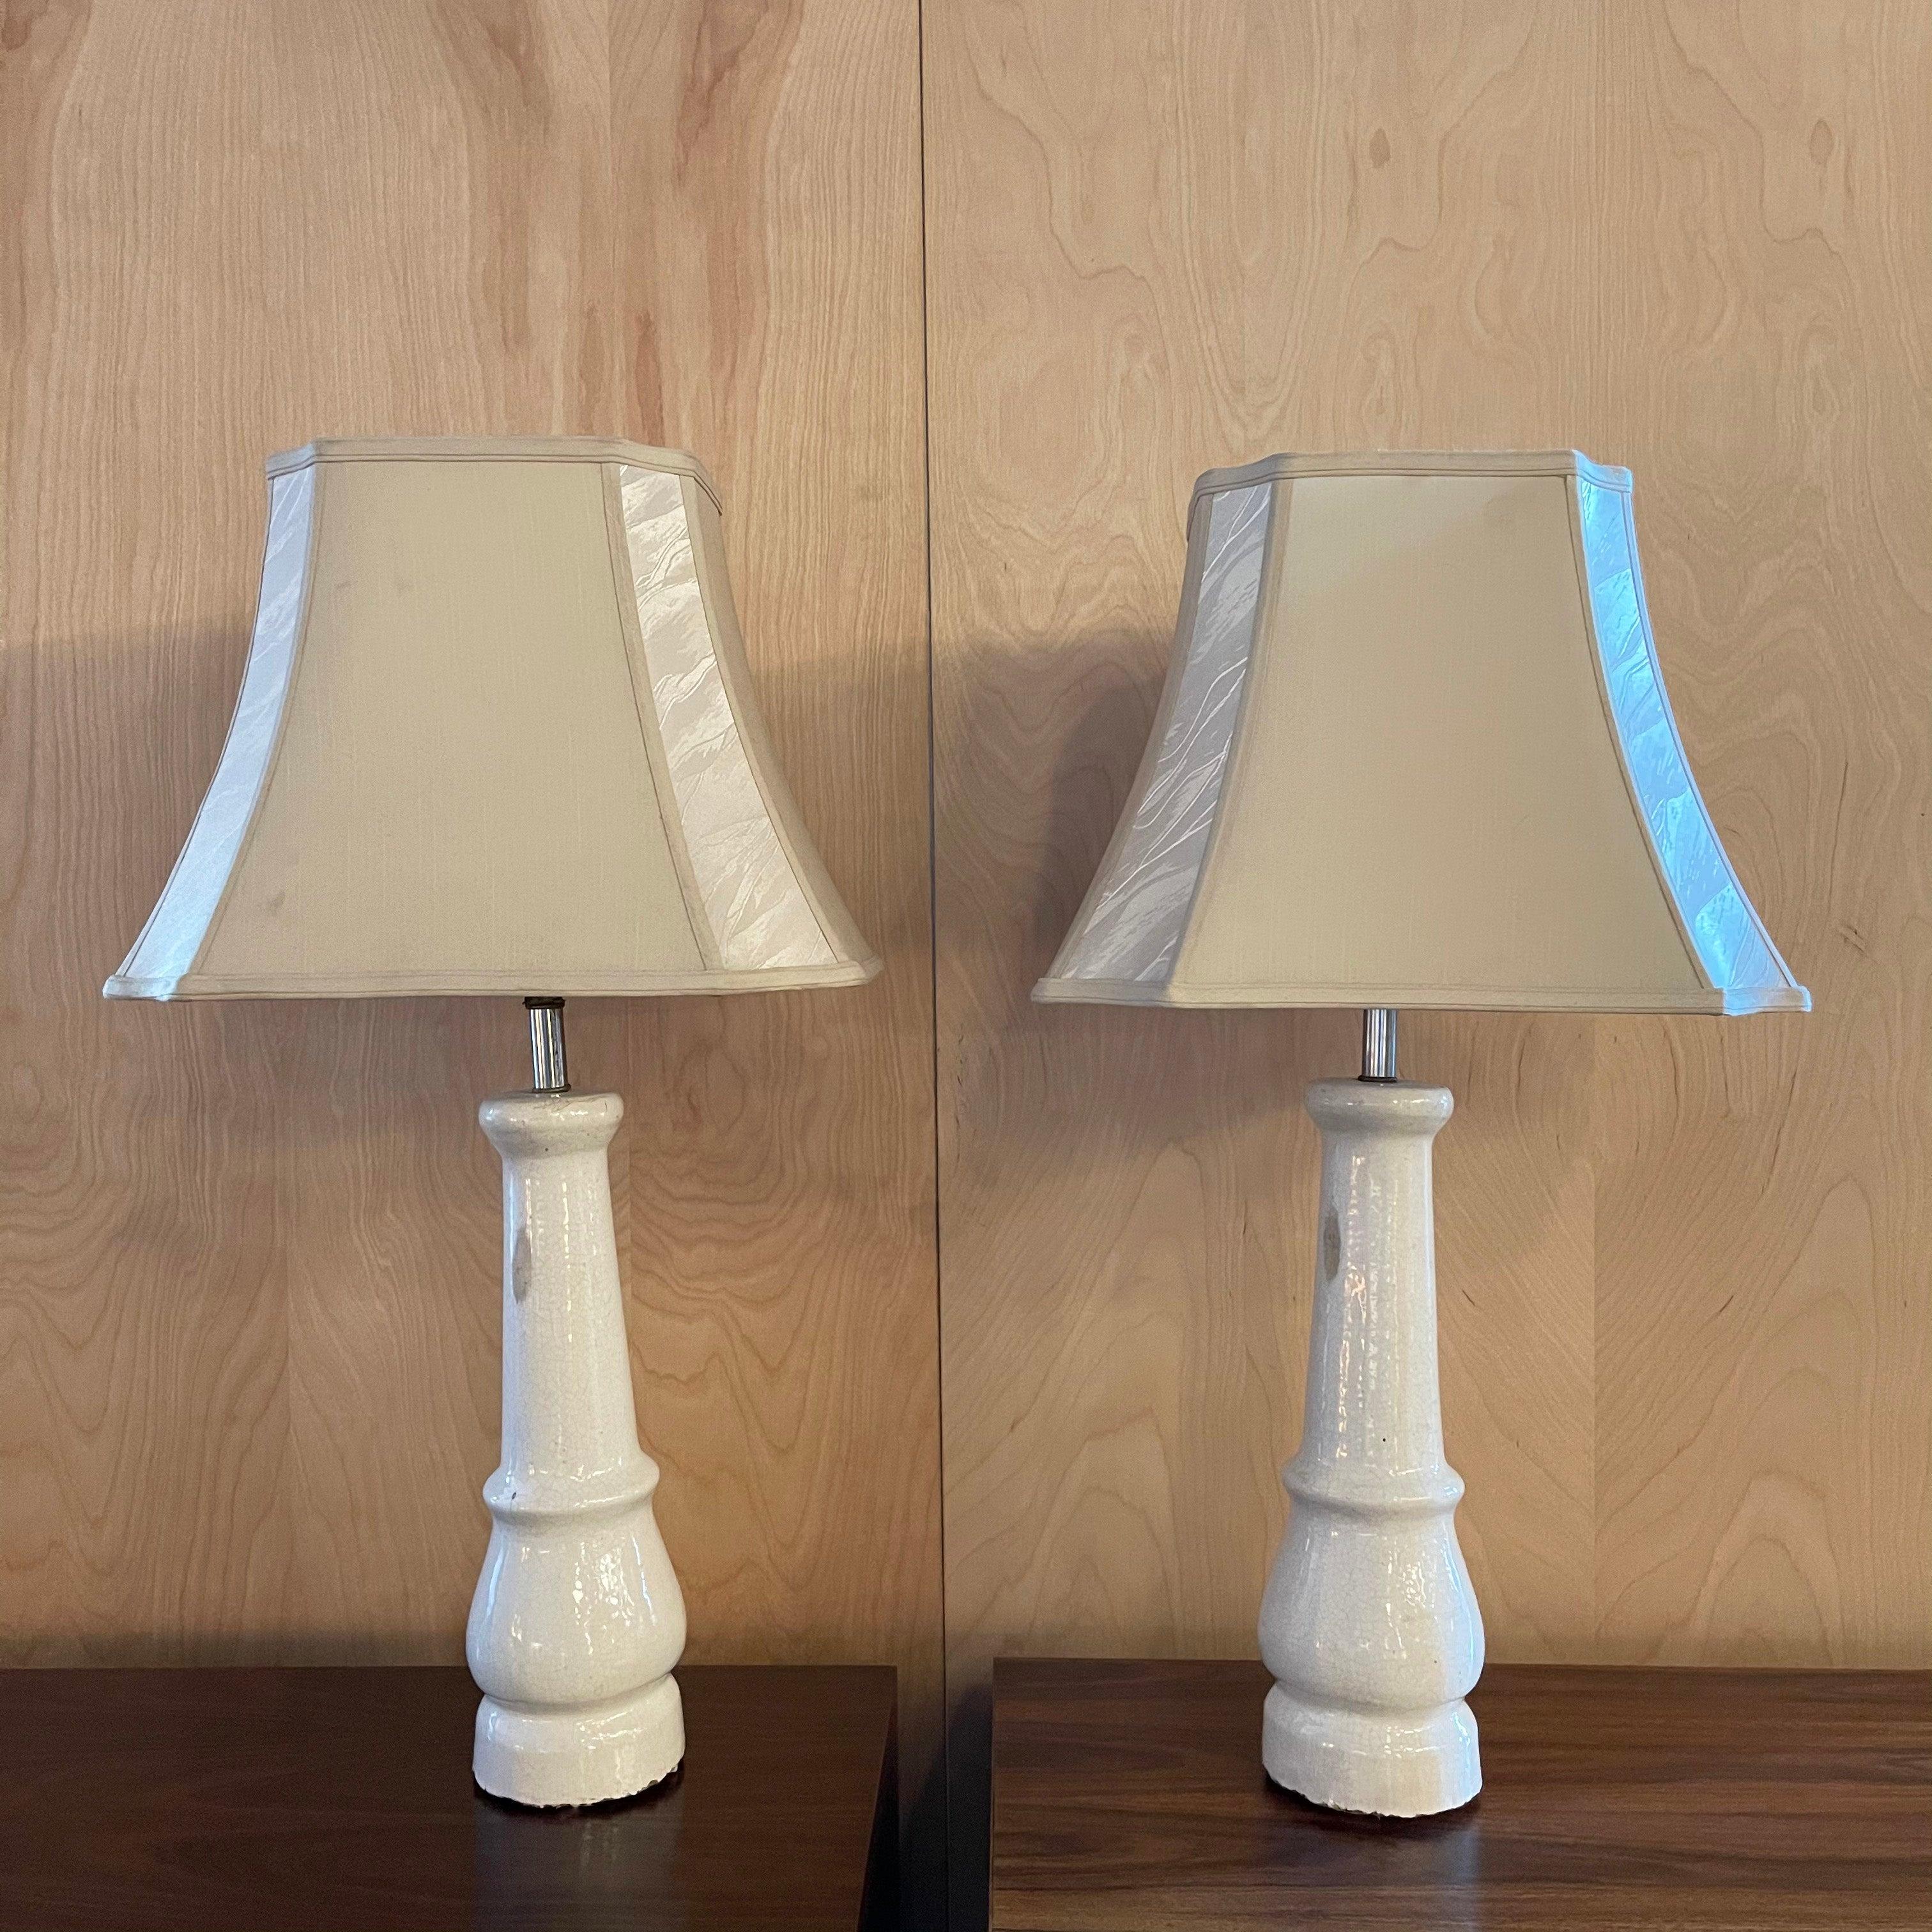 Pair of antique table lamps are created from early 20th century, patinated porcelain legs with brushed nickel necks and brass sockets, harps and finials. The lamps are newly wired with gray cloth cord to accept up to a 75 watt bulb each. The